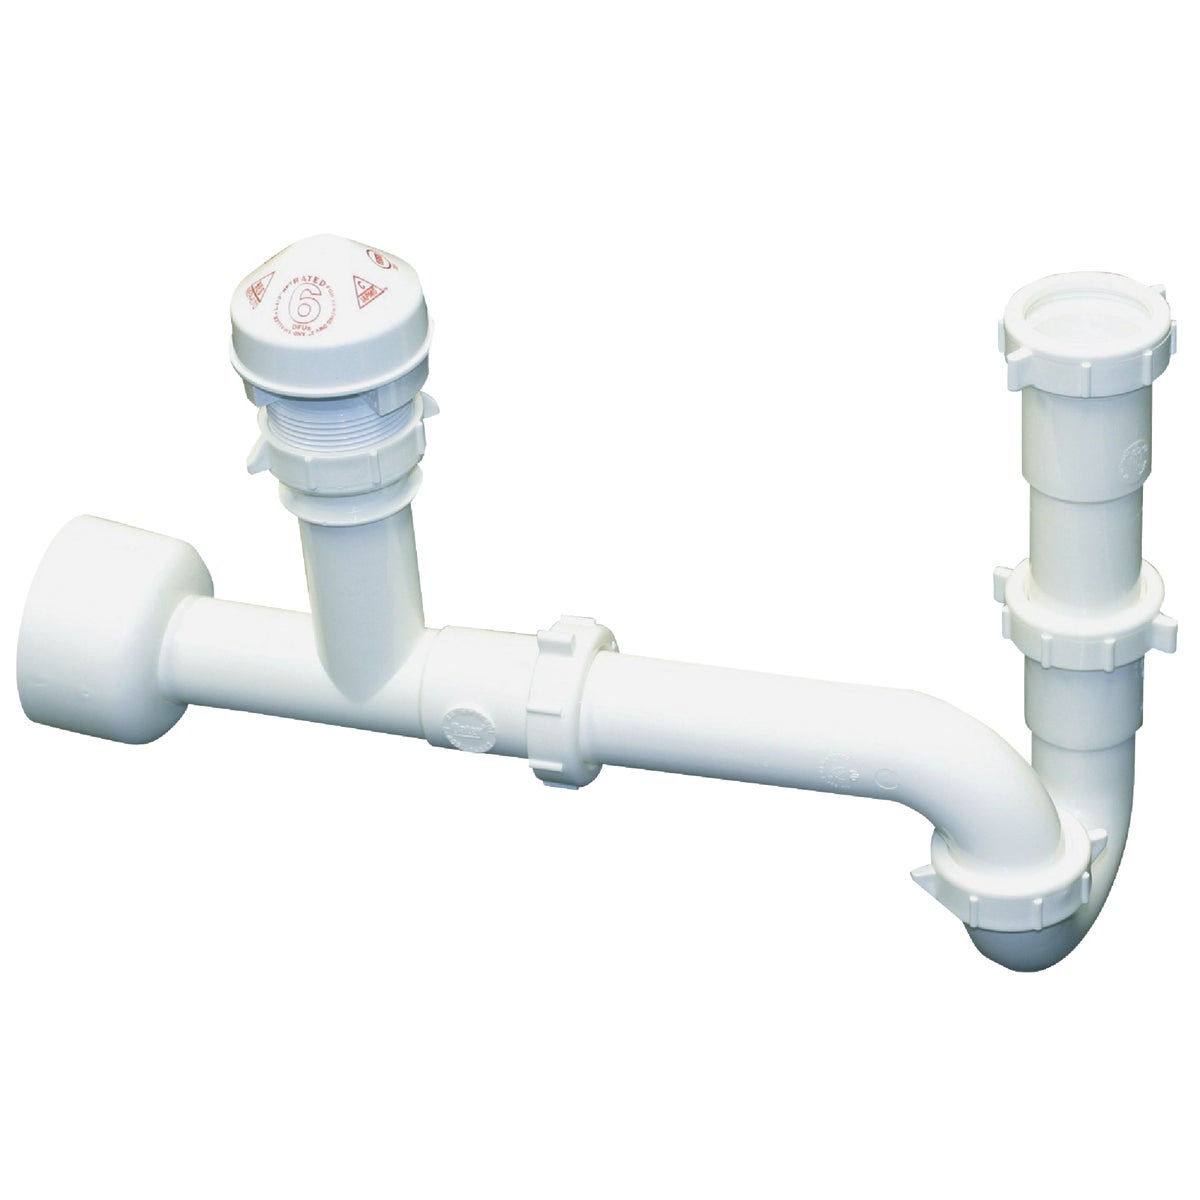 Item 449287, Air admittance valves provide an alternative to secondary venting when 